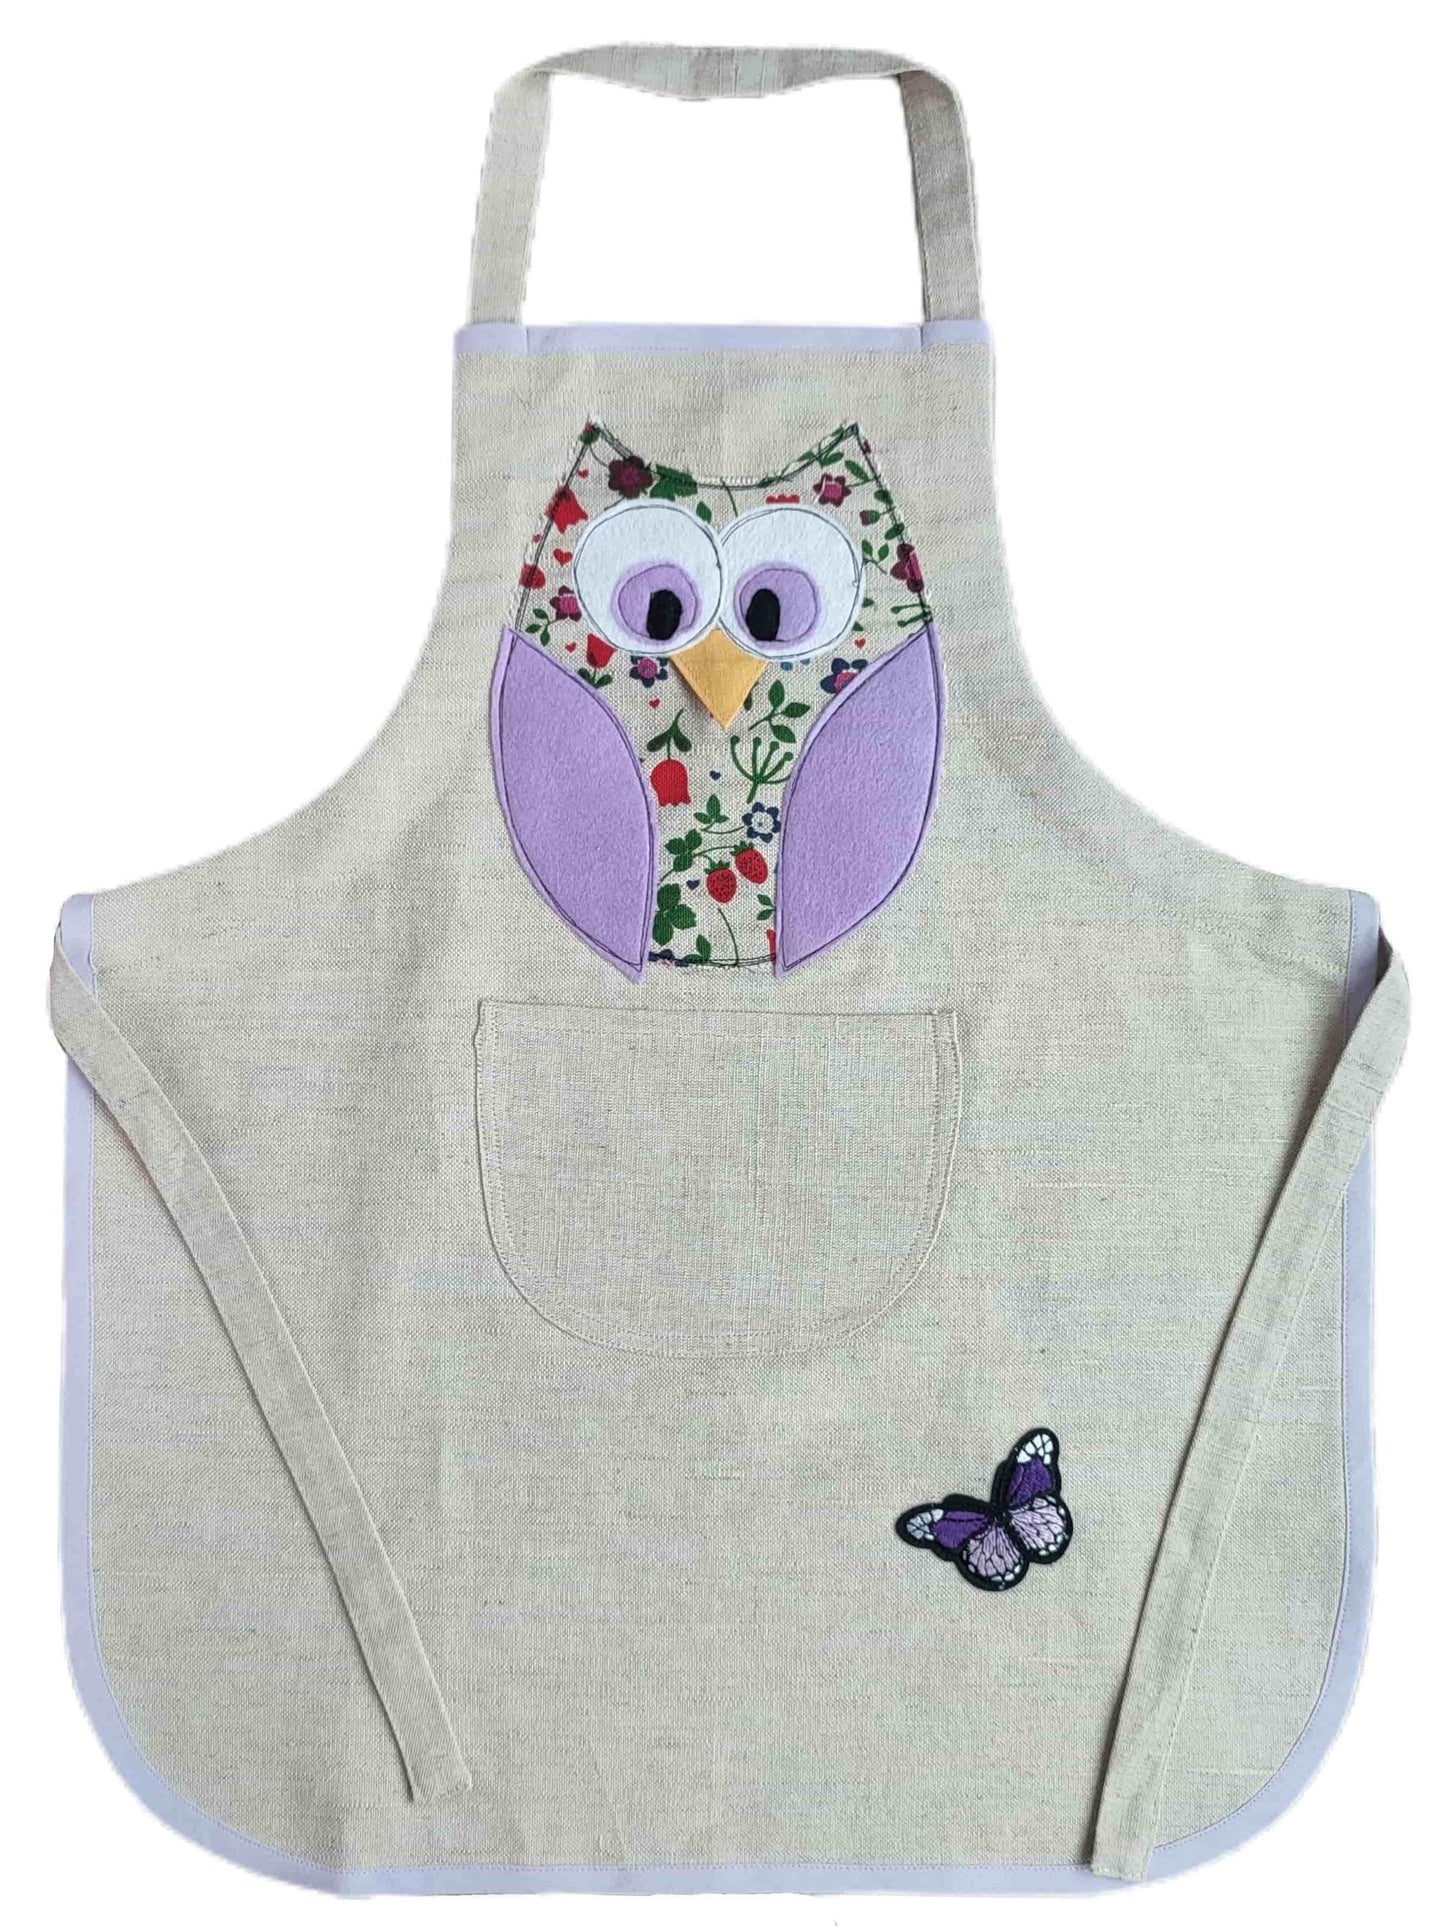 Children's apron (4-8 years old) OWL - Linen4me